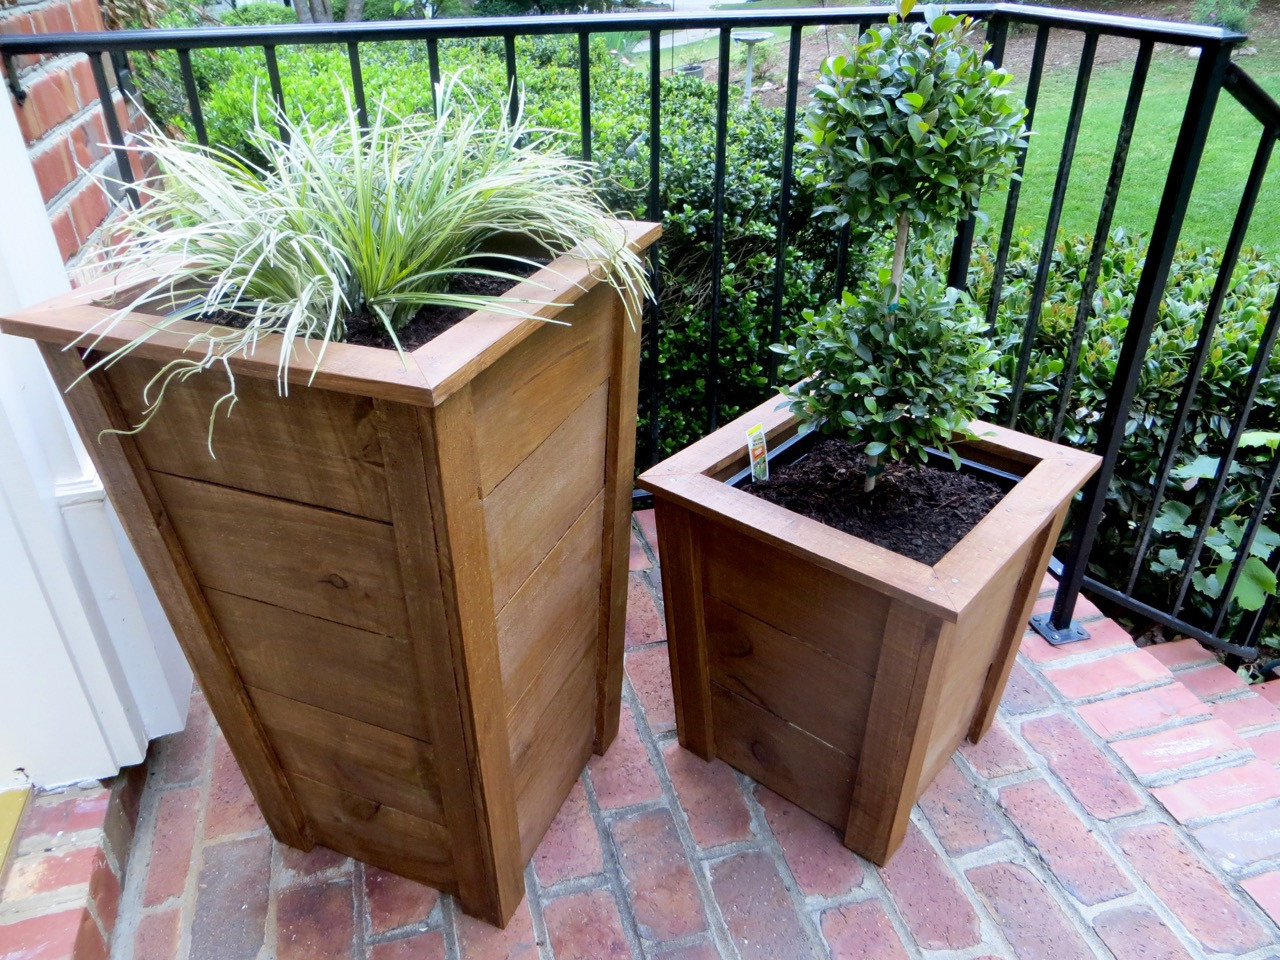 DIY Wooden Flower Boxes
 The Project Lady DIY Tutorial Decorative Wood Planter Boxes